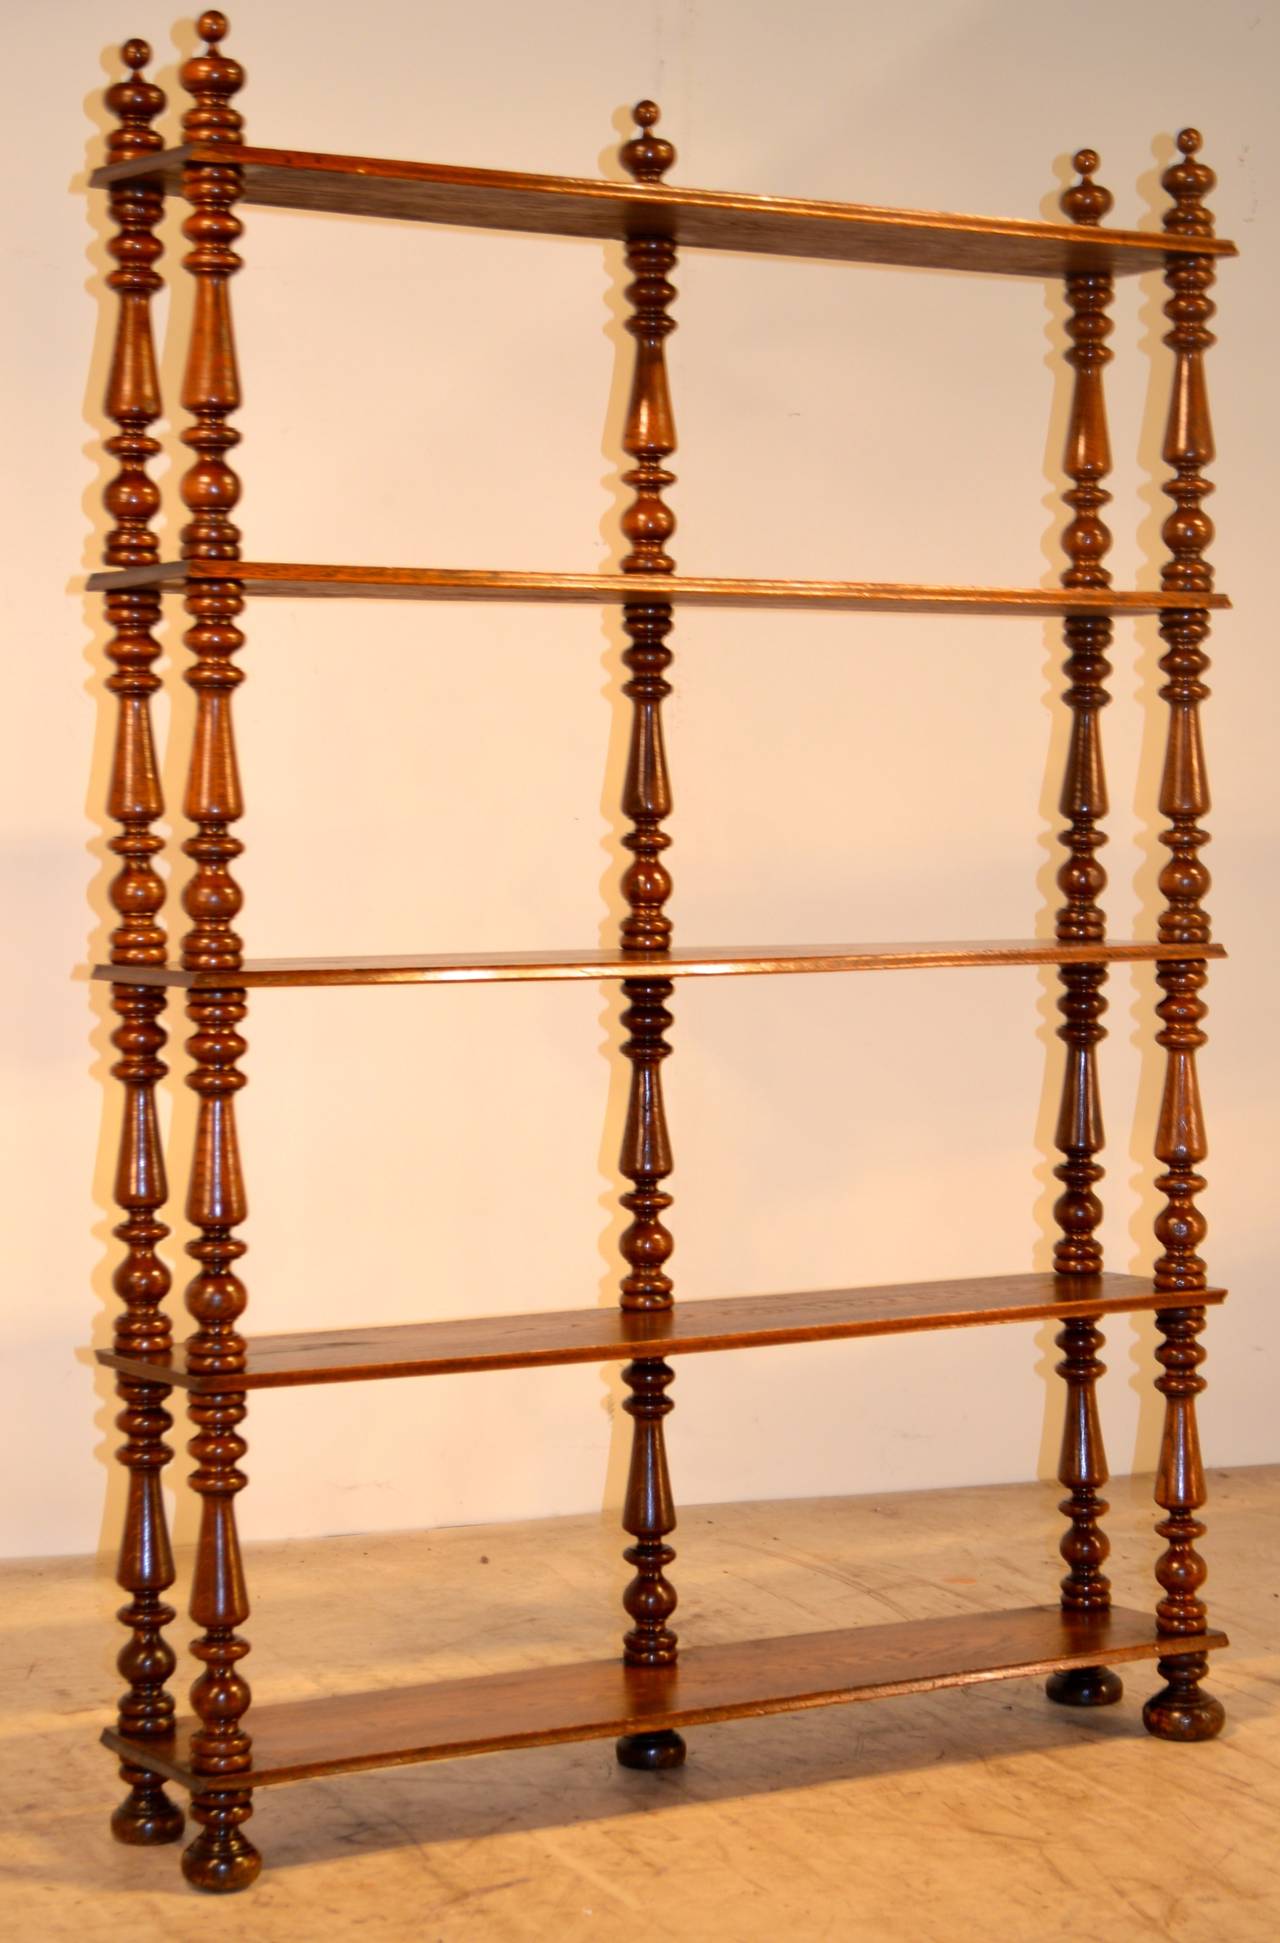 Mid-19th-century English narrow mahogany étagère. The shelves have beveled edges and are separated by turned shelf supports.